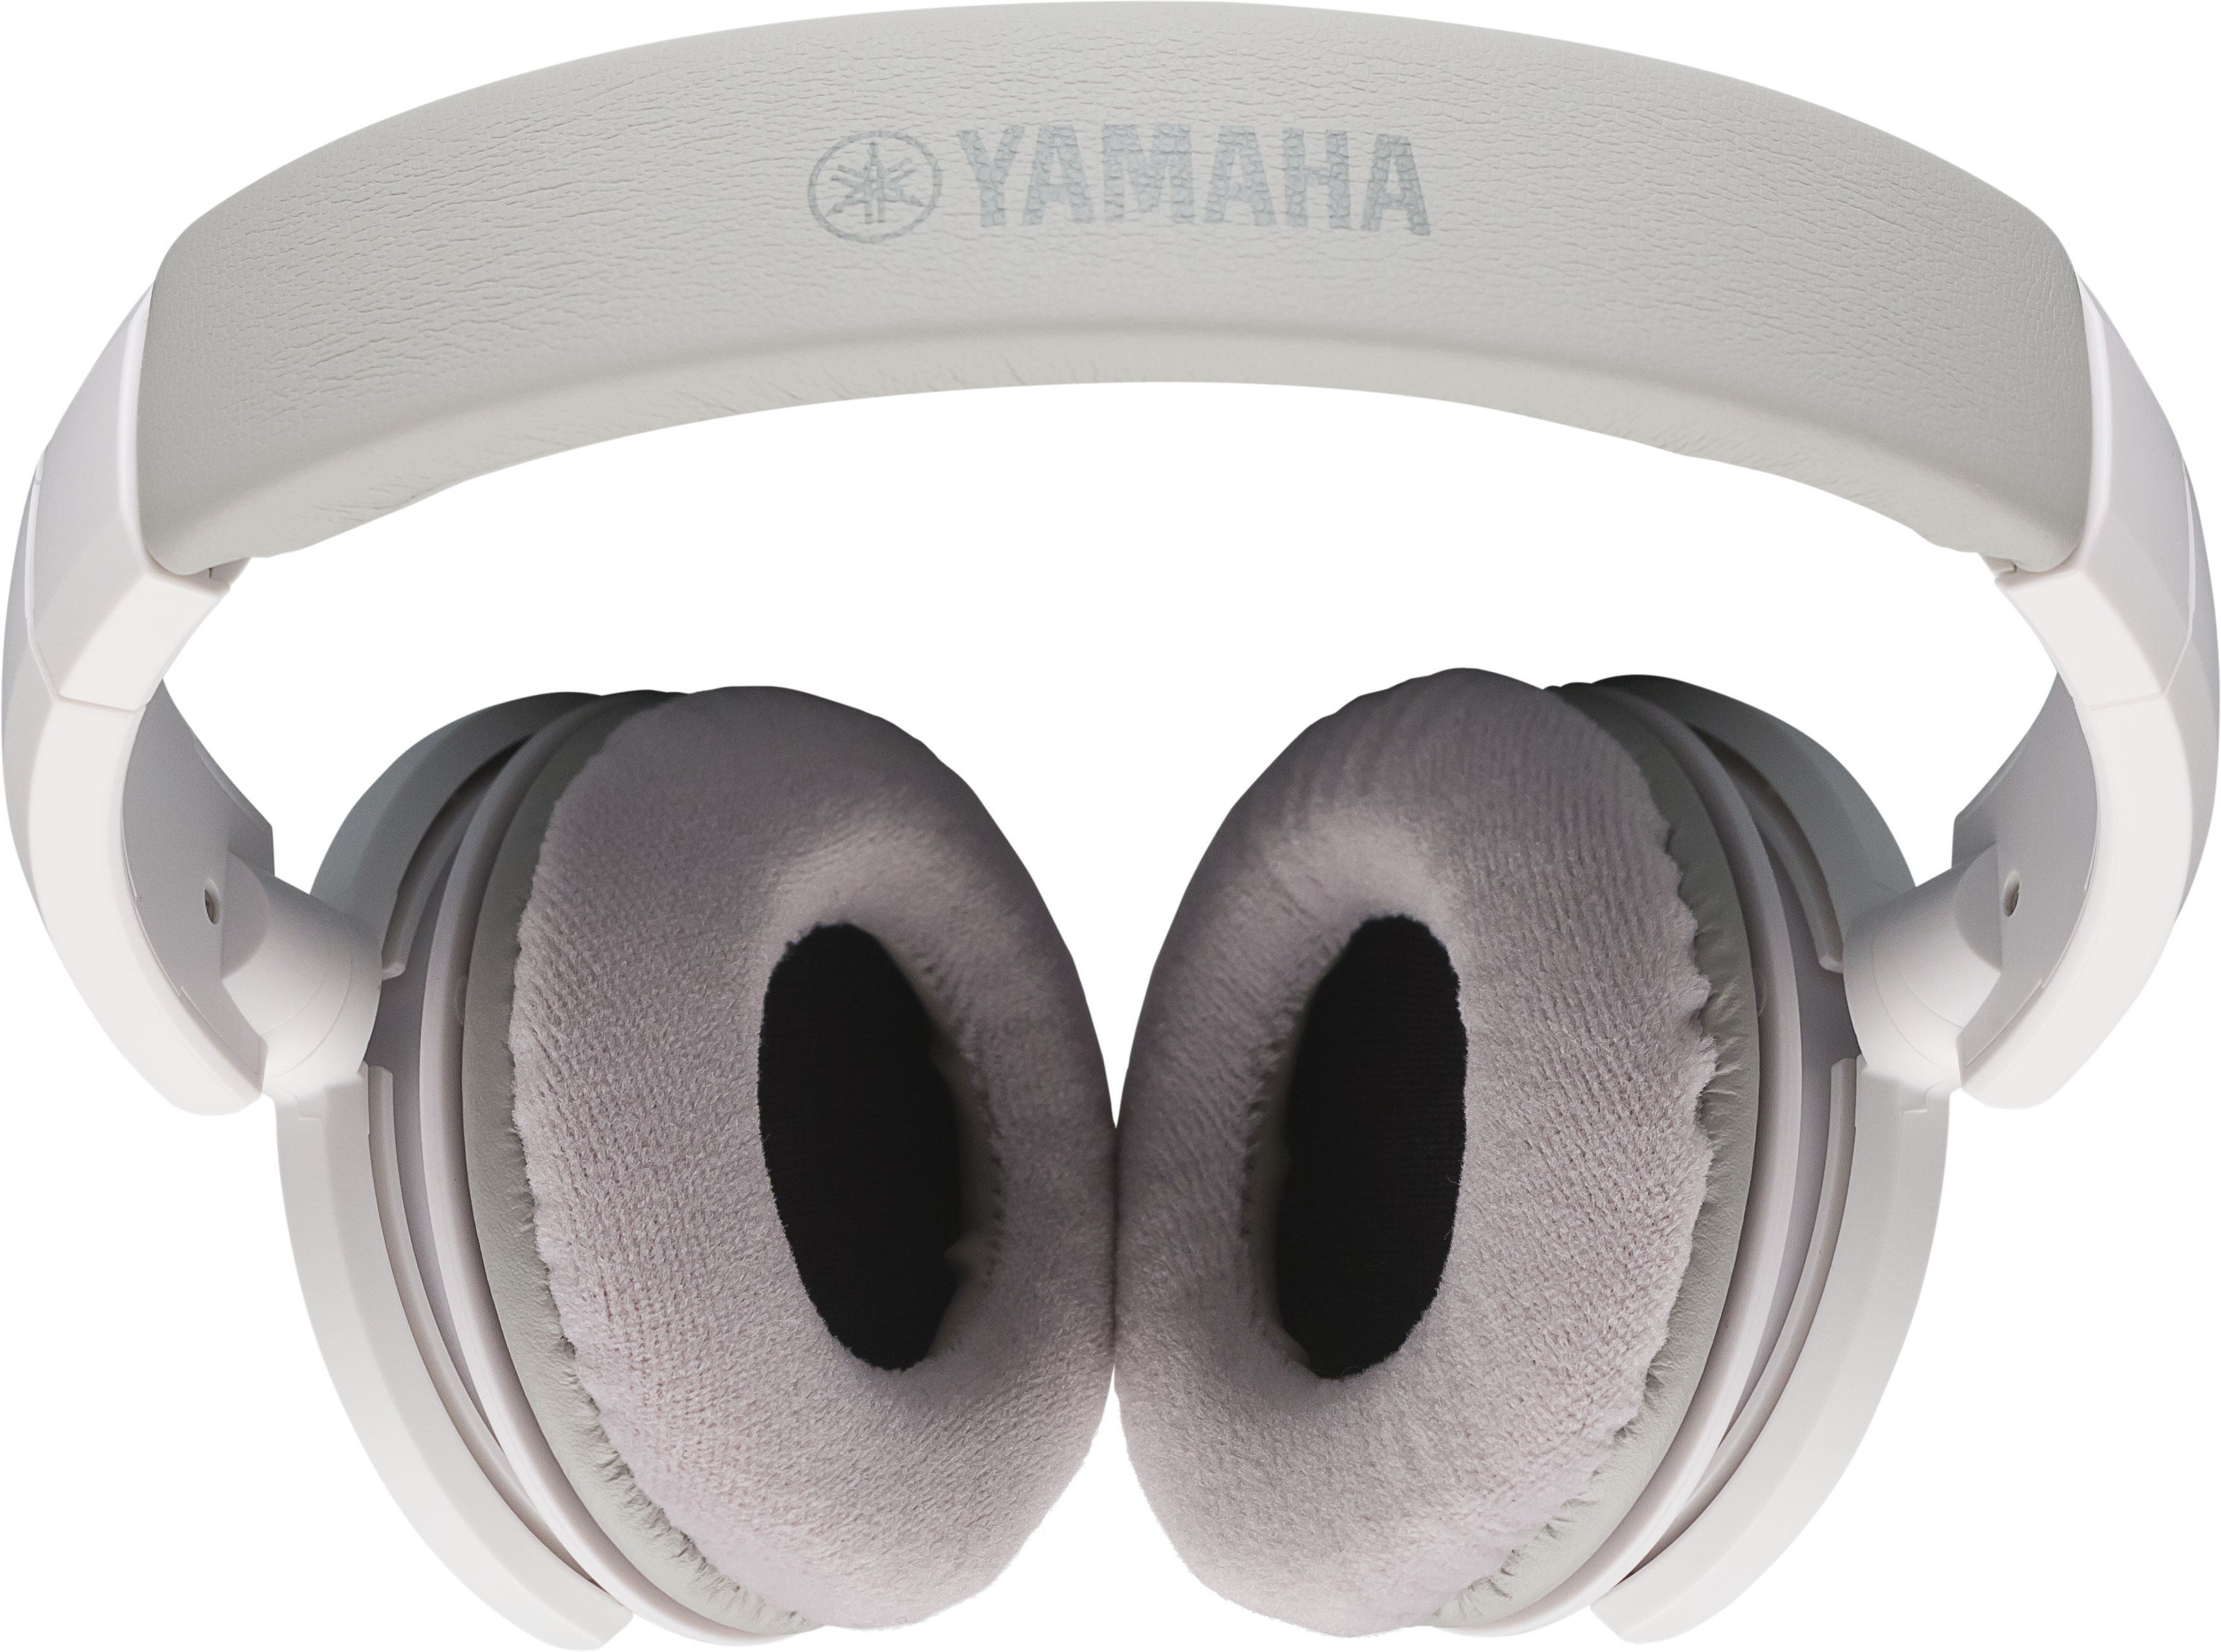 Yamaha Hph-150wh - Casque Studio Ouvert - Variation 2